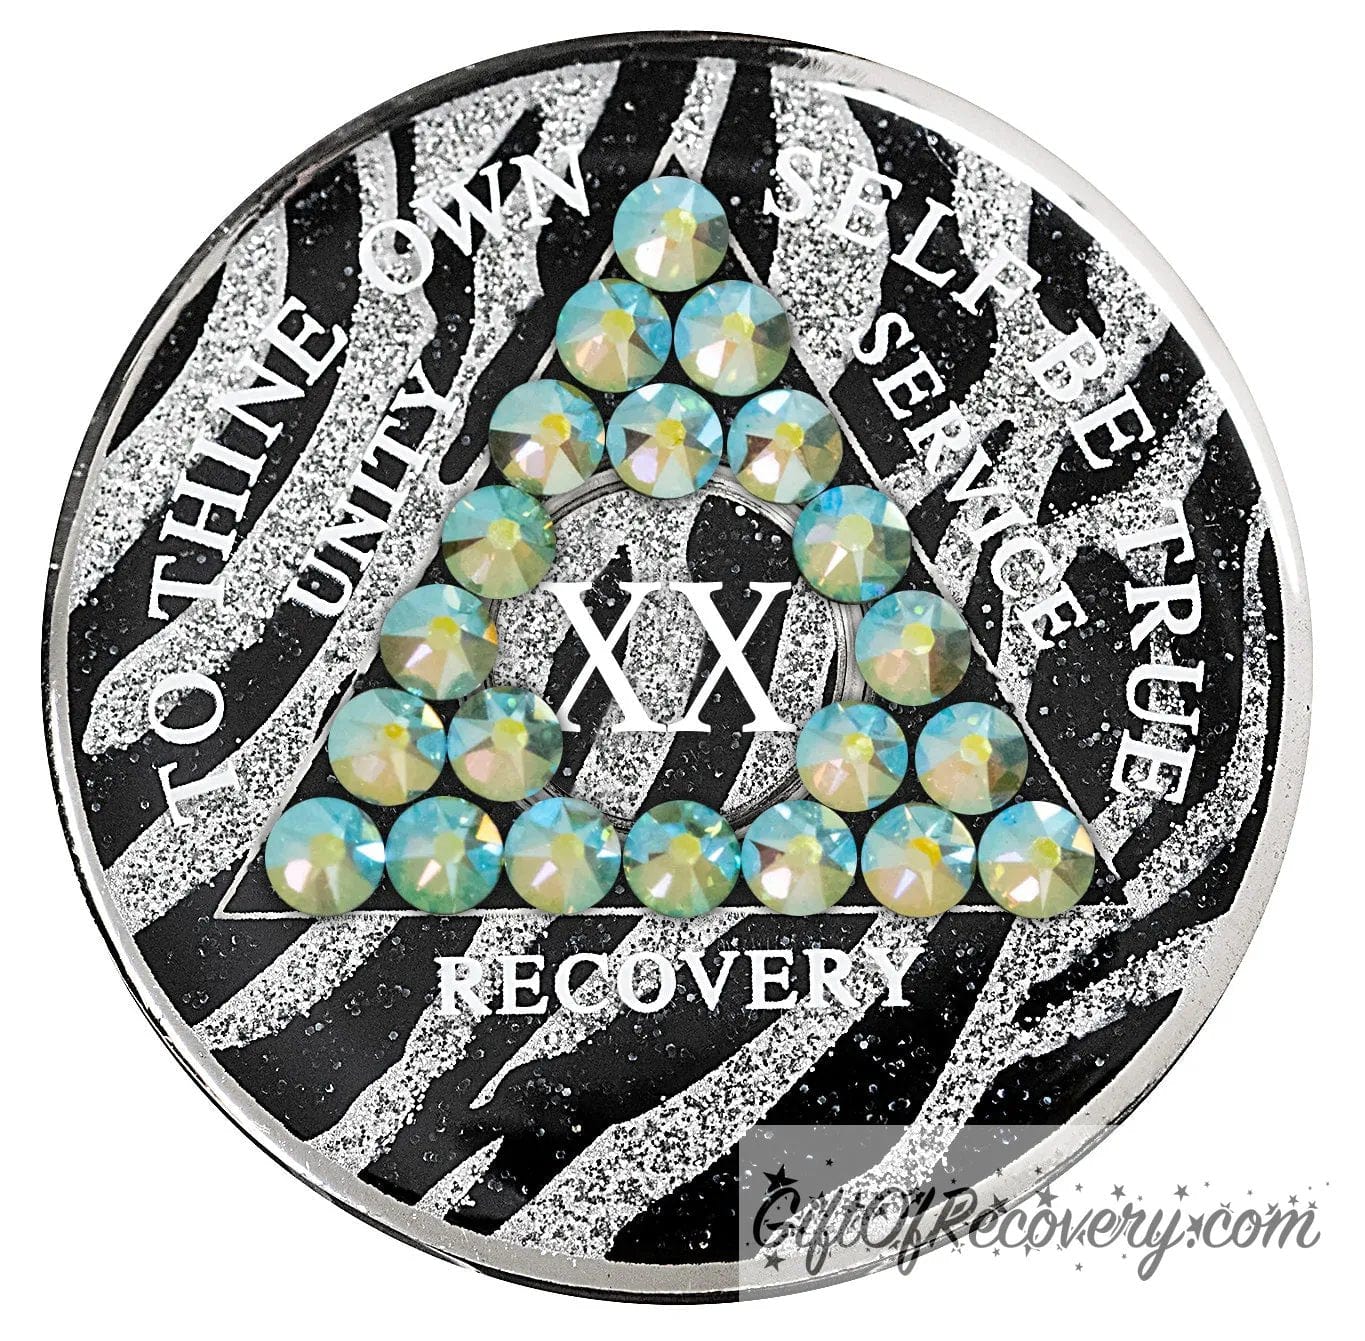 20 year Zebra glitter style AA medallion with 21 genuine peridot crystals, AA moto, unity, service, recovery, and roman numeral are in white and blend into the pattern, so you can let your recovery shine, not your time, the outer rim is silver plated, sealed in a high-quality, chip and scratch-resistant resin dome giving it a beautiful glossy look that will last.